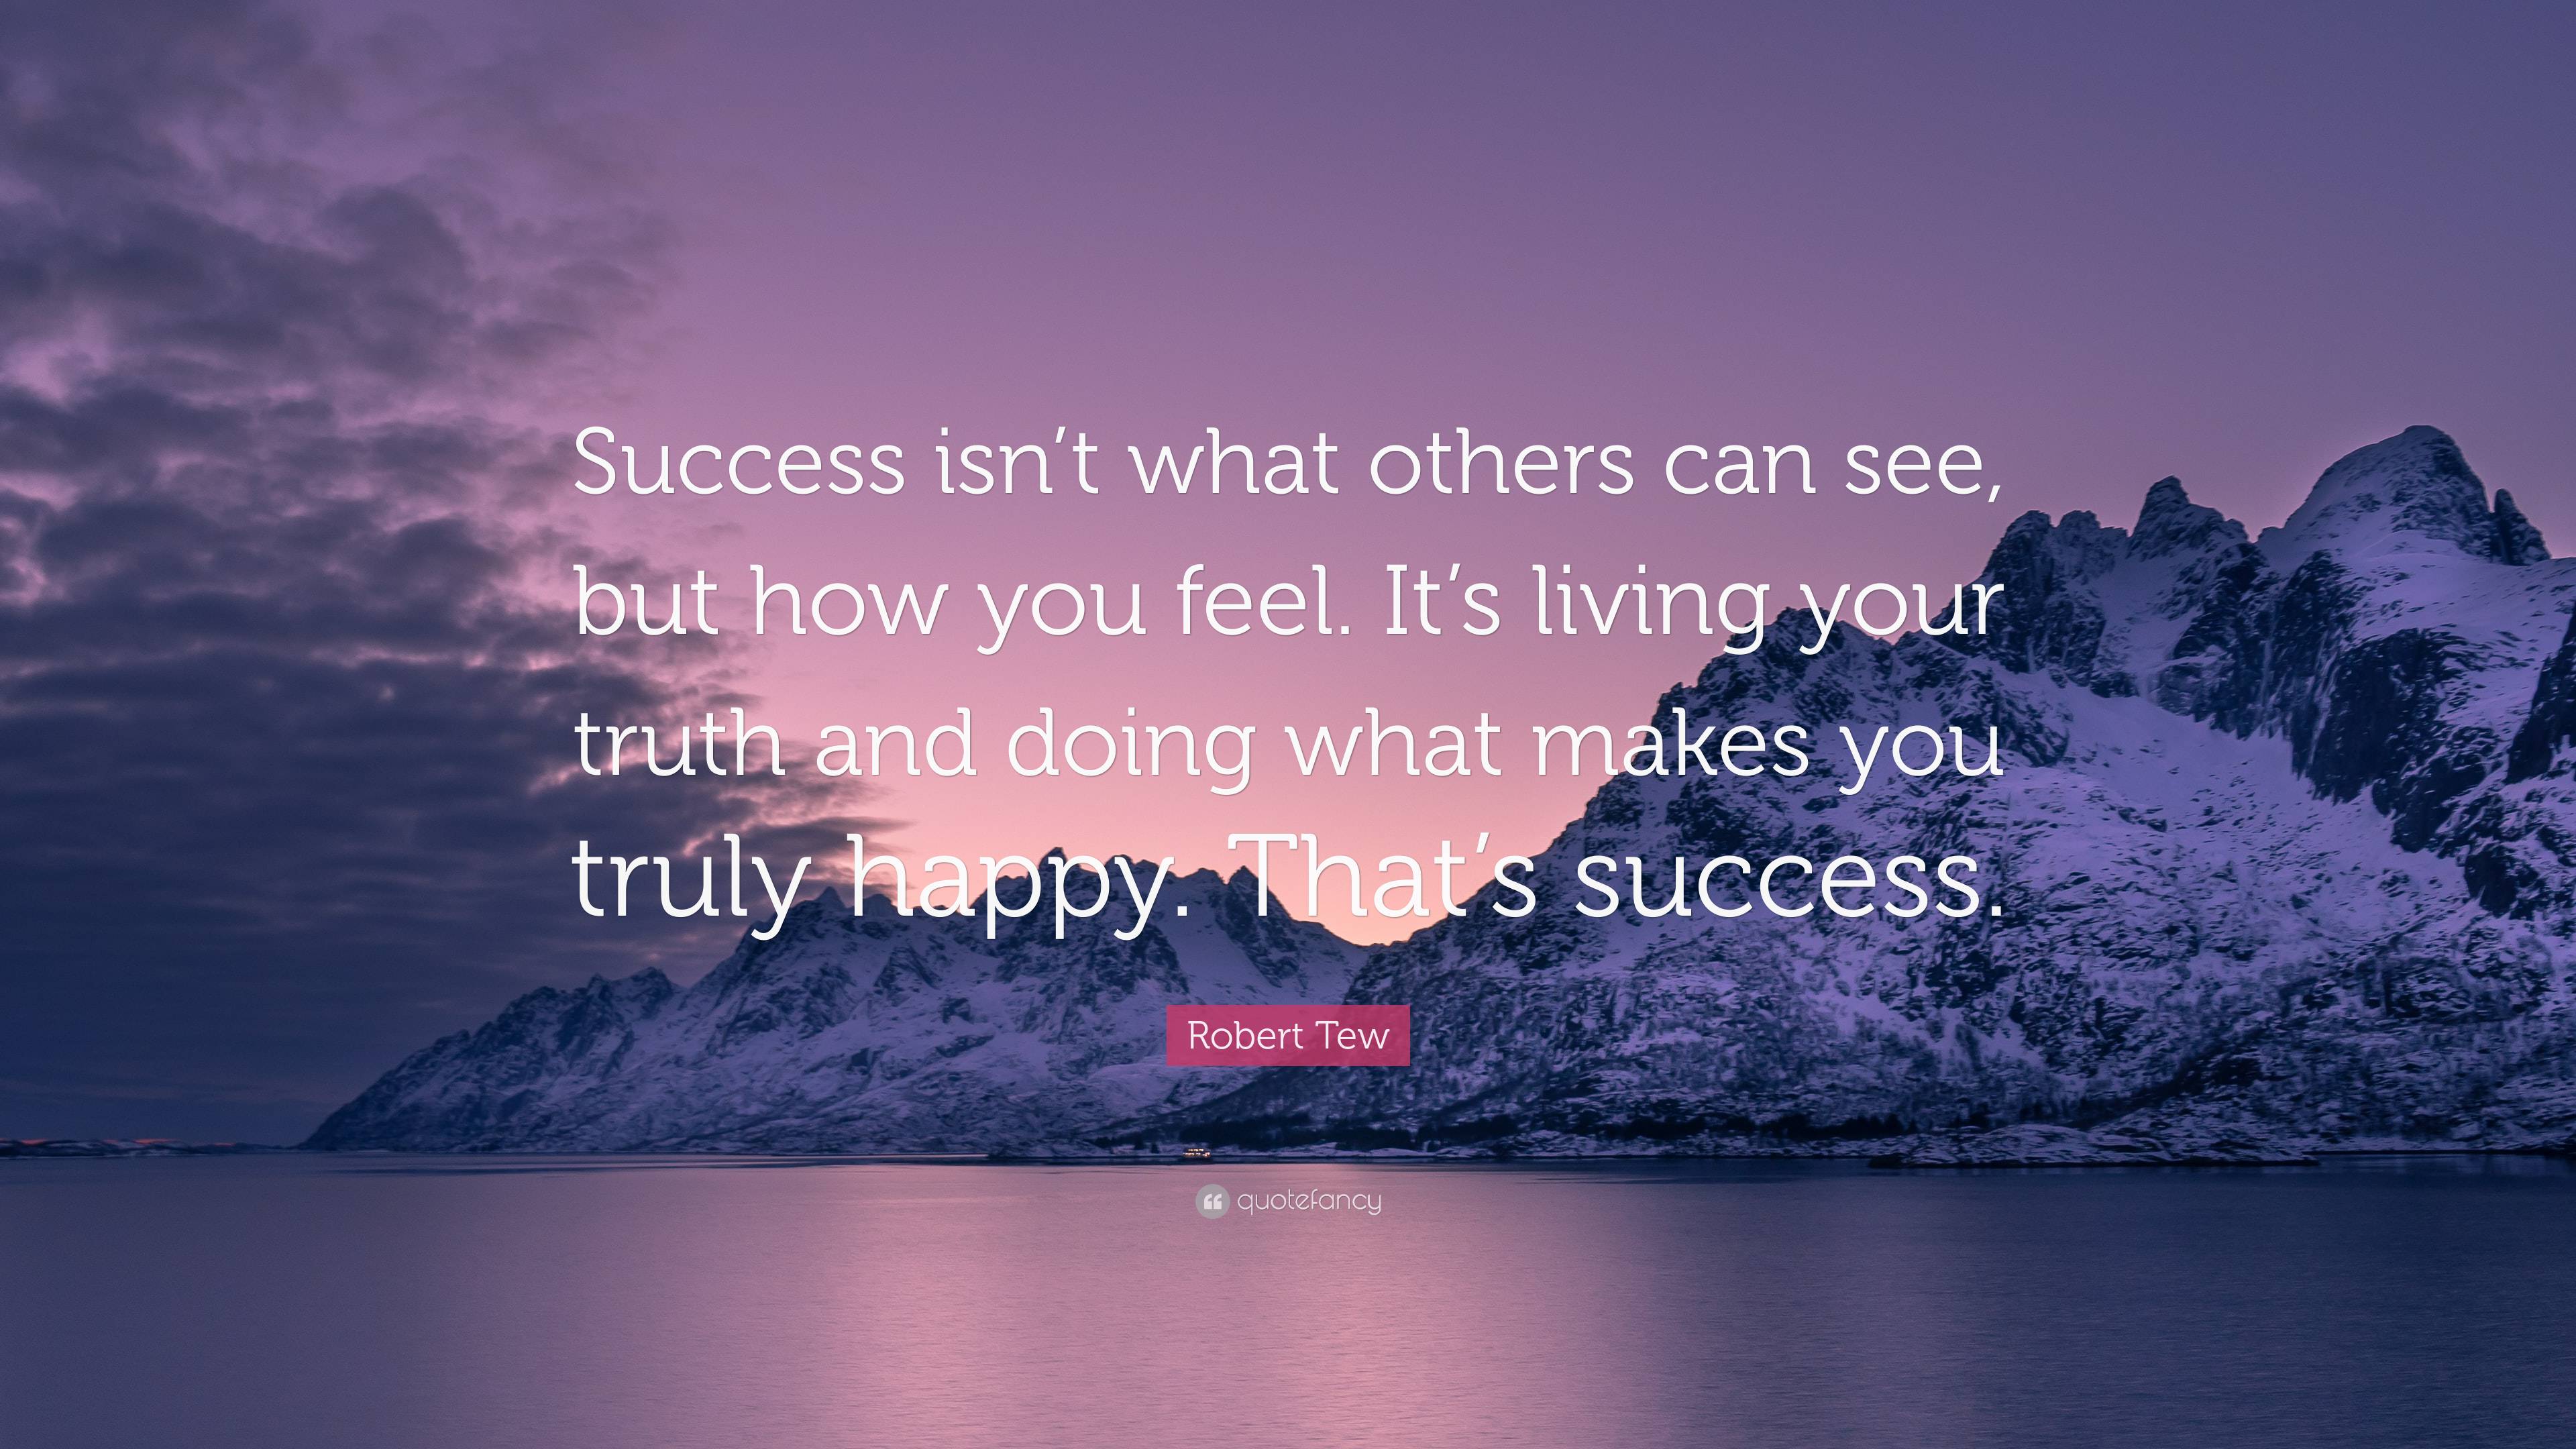 Robert Tew Quote: “Success isn’t what others can see, but how you feel ...